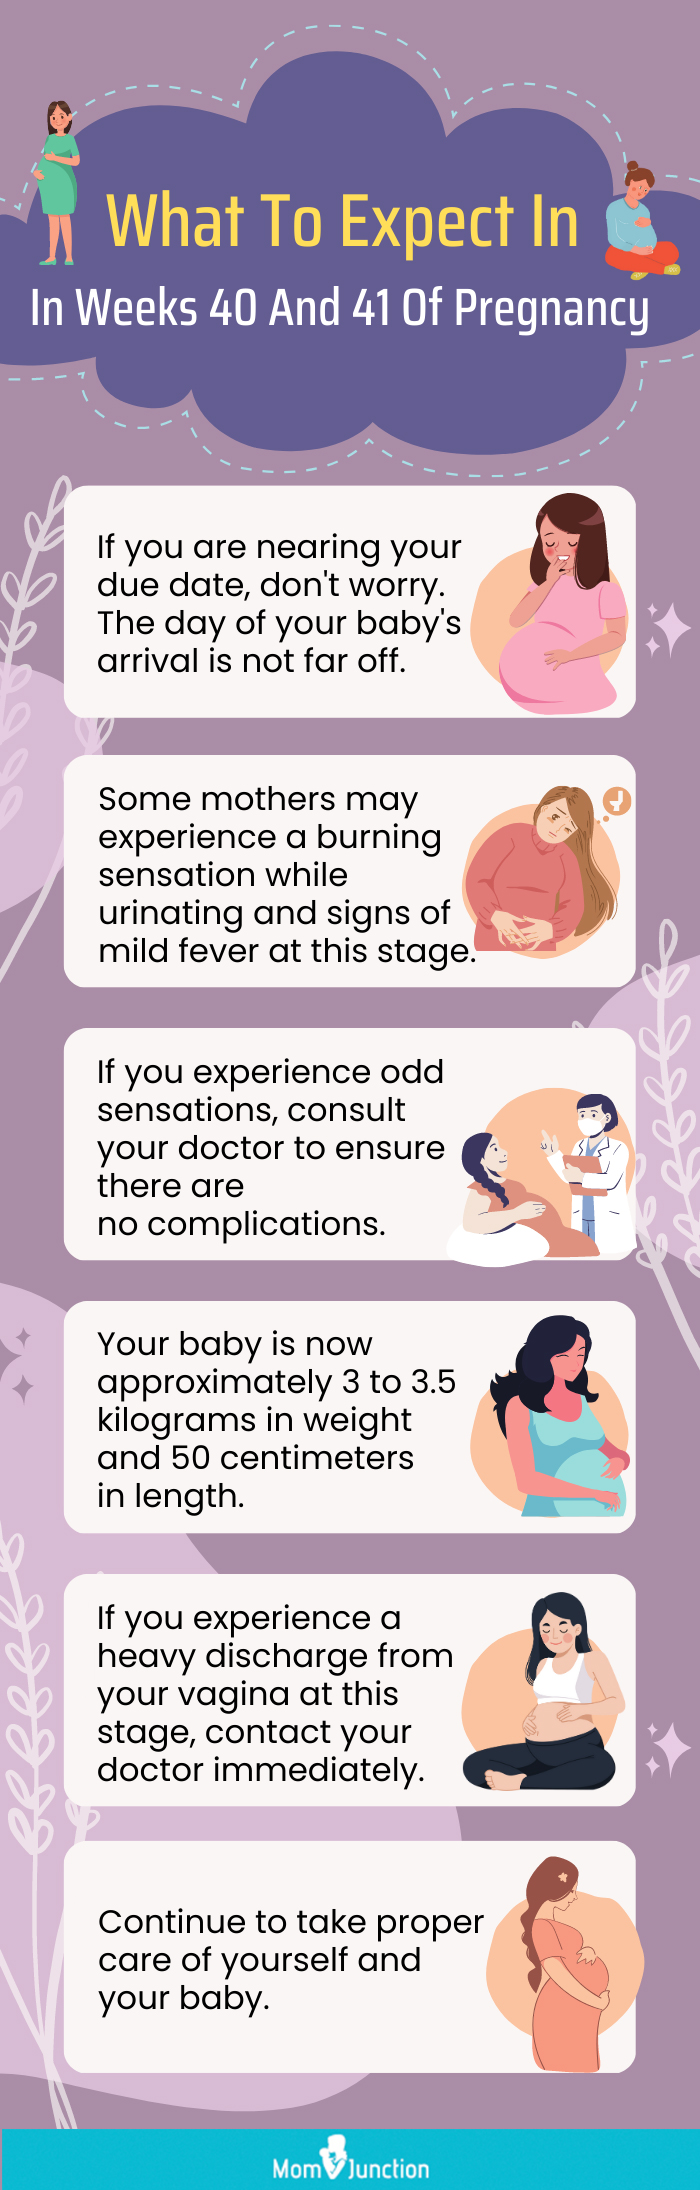 https://www.momjunction.com/wp-content/uploads/2014/08/Infographic-Key-Points-About-The-10th-Month-Of-Pregnancy-1.jpg